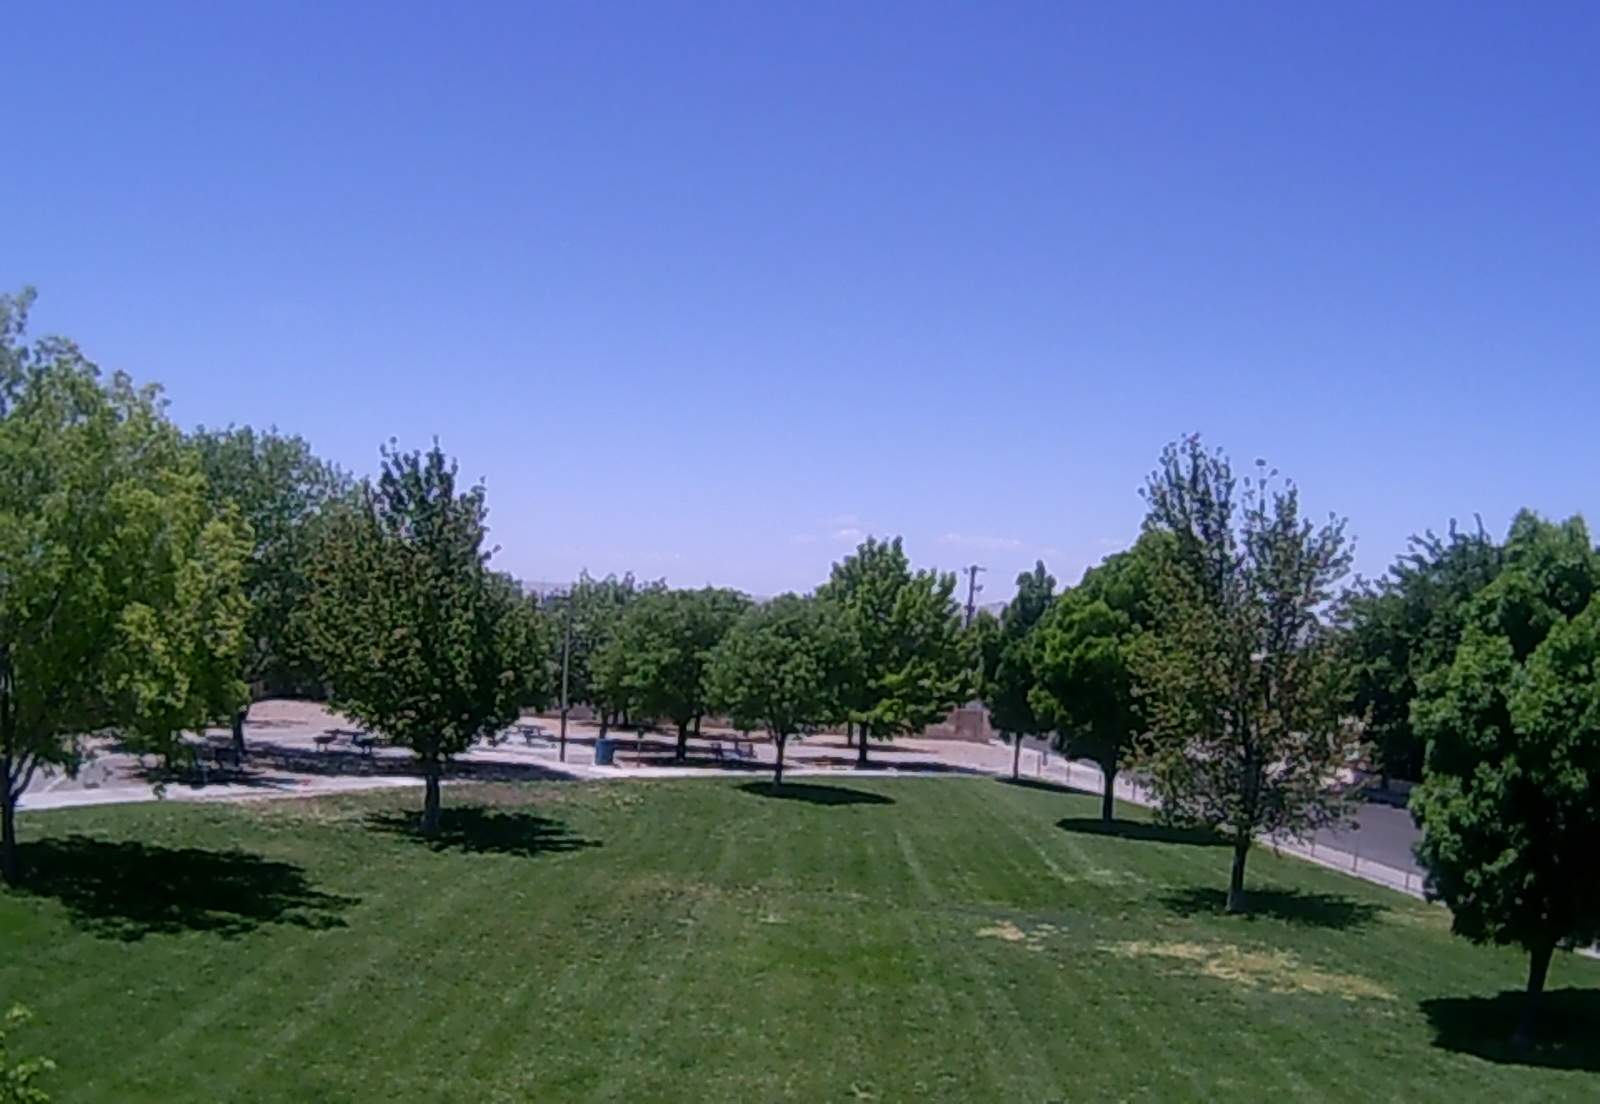 Bel-Air park in Albuquerque, NM, facing west, photographed with the standard Holystone F181G camera